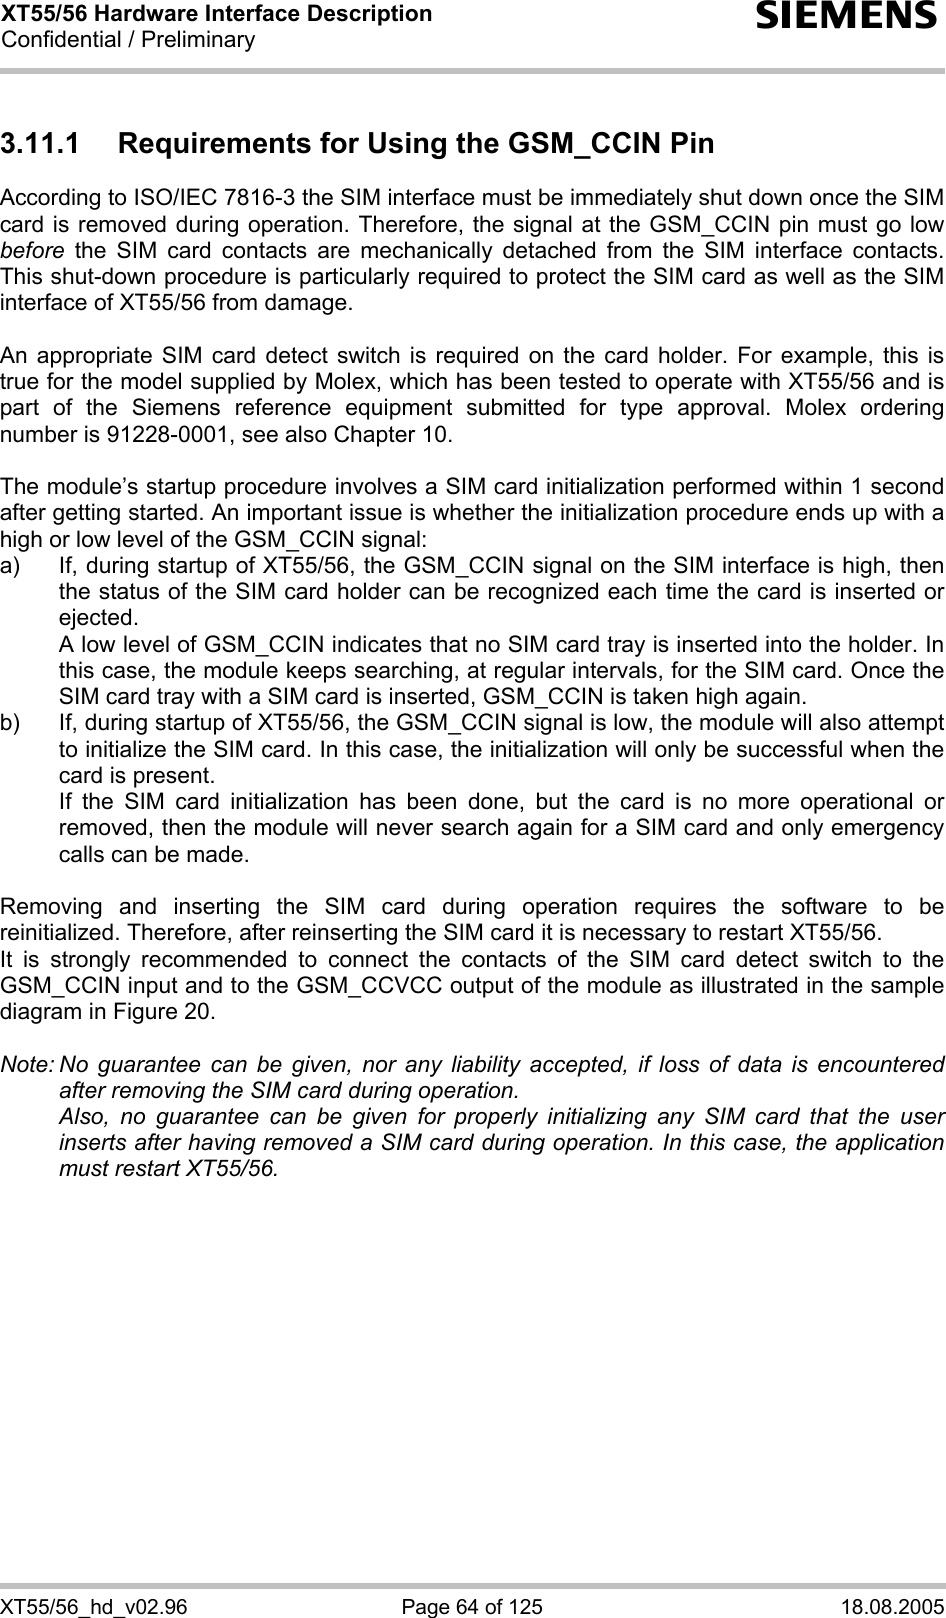 XT55/56 Hardware Interface Description Confidential / Preliminary s XT55/56_hd_v02.96  Page 64 of 125  18.08.2005 3.11.1  Requirements for Using the GSM_CCIN Pin According to ISO/IEC 7816-3 the SIM interface must be immediately shut down once the SIM card is removed during operation. Therefore, the signal at the GSM_CCIN pin must go low before the SIM card contacts are mechanically detached from the SIM interface contacts. This shut-down procedure is particularly required to protect the SIM card as well as the SIM interface of XT55/56 from damage.  An appropriate SIM card detect switch is required on the card holder. For example, this is true for the model supplied by Molex, which has been tested to operate with XT55/56 and is part of the Siemens reference equipment submitted for type approval. Molex ordering number is 91228-0001, see also Chapter 10.  The module’s startup procedure involves a SIM card initialization performed within 1 second after getting started. An important issue is whether the initialization procedure ends up with a high or low level of the GSM_CCIN signal: a)  If, during startup of XT55/56, the GSM_CCIN signal on the SIM interface is high, then the status of the SIM card holder can be recognized each time the card is inserted or ejected.    A low level of GSM_CCIN indicates that no SIM card tray is inserted into the holder. In this case, the module keeps searching, at regular intervals, for the SIM card. Once the SIM card tray with a SIM card is inserted, GSM_CCIN is taken high again. b)  If, during startup of XT55/56, the GSM_CCIN signal is low, the module will also attempt to initialize the SIM card. In this case, the initialization will only be successful when the card is present.    If the SIM card initialization has been done, but the card is no more operational or removed, then the module will never search again for a SIM card and only emergency calls can be made.  Removing and inserting the SIM card during operation requires the software to be reinitialized. Therefore, after reinserting the SIM card it is necessary to restart XT55/56.  It is strongly recommended to connect the contacts of the SIM card detect switch to the GSM_CCIN input and to the GSM_CCVCC output of the module as illustrated in the sample diagram in Figure 20.  Note: No guarantee can be given, nor any liability accepted, if loss of data is encountered after removing the SIM card during operation.    Also, no guarantee can be given for properly initializing any SIM card that the user inserts after having removed a SIM card during operation. In this case, the application must restart XT55/56.   